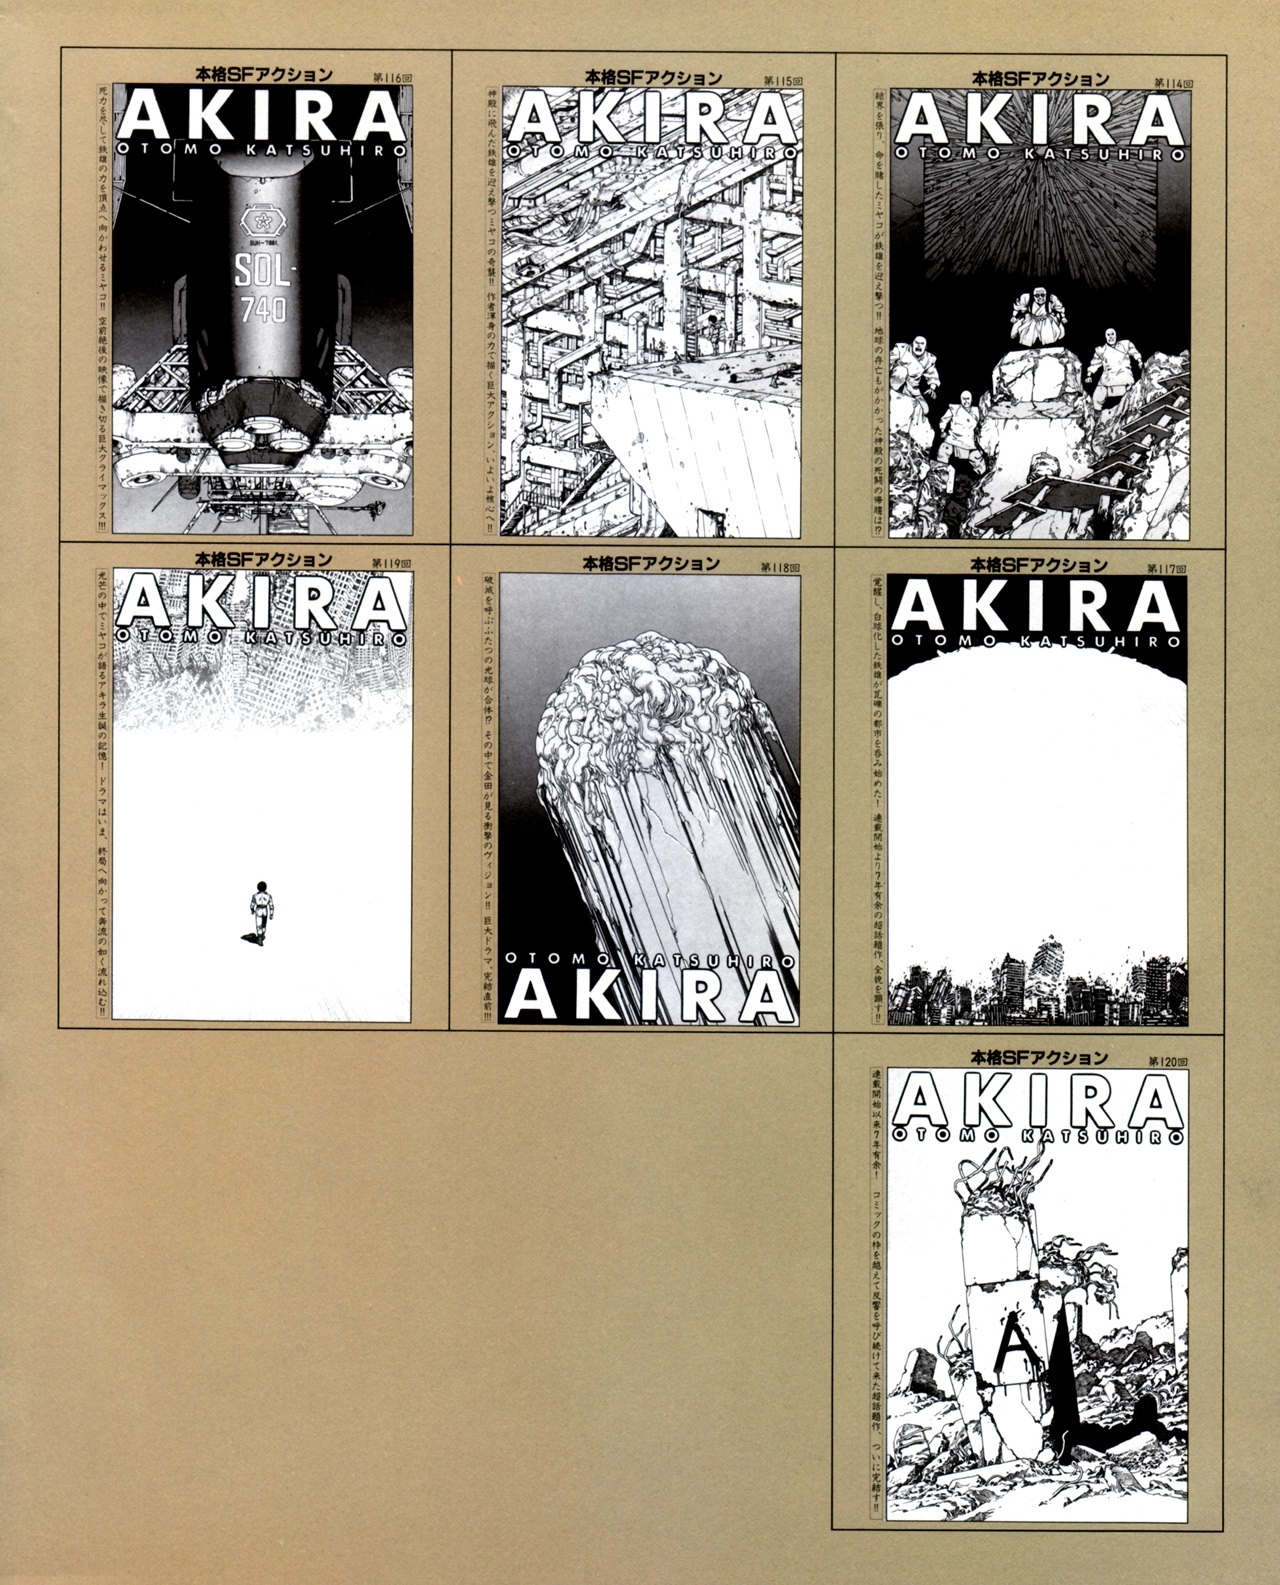 Akira club - The memory of Akira lives on in our hearts! 189